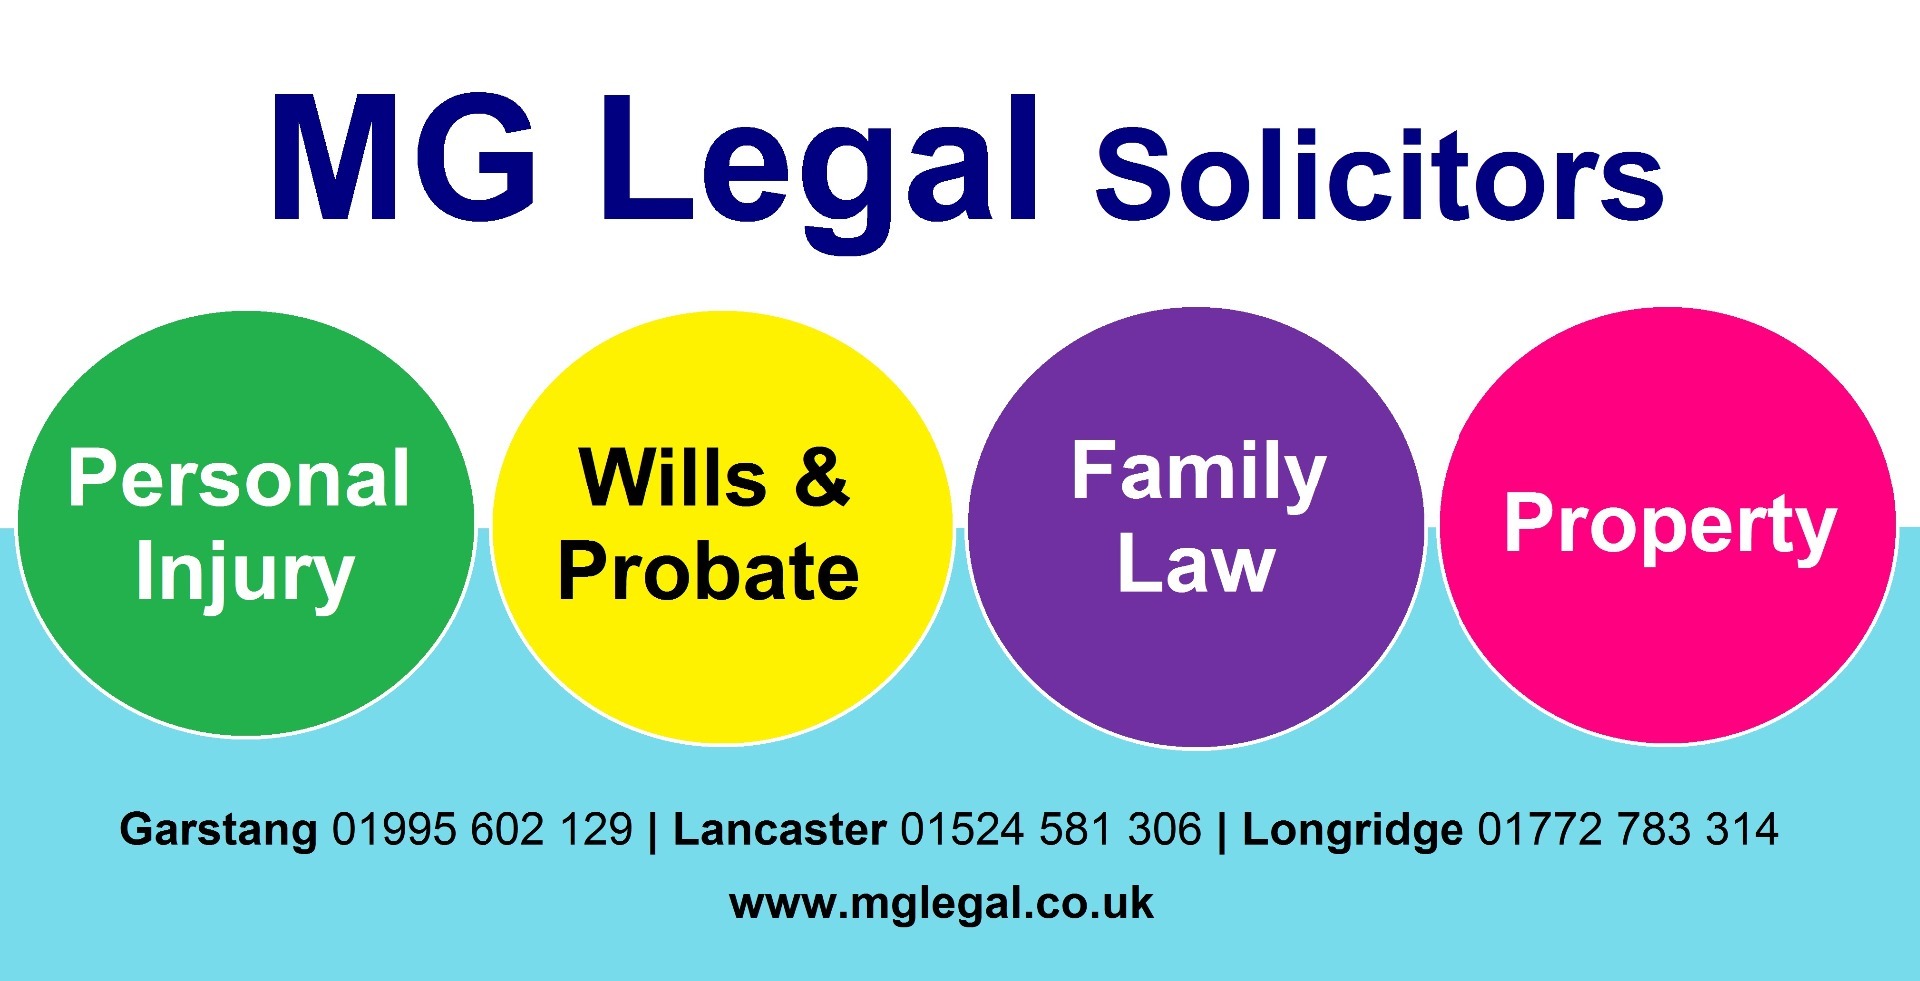 MG Legal Solicitors | Personal Injury | Wills & Probate | Family Law | Property.